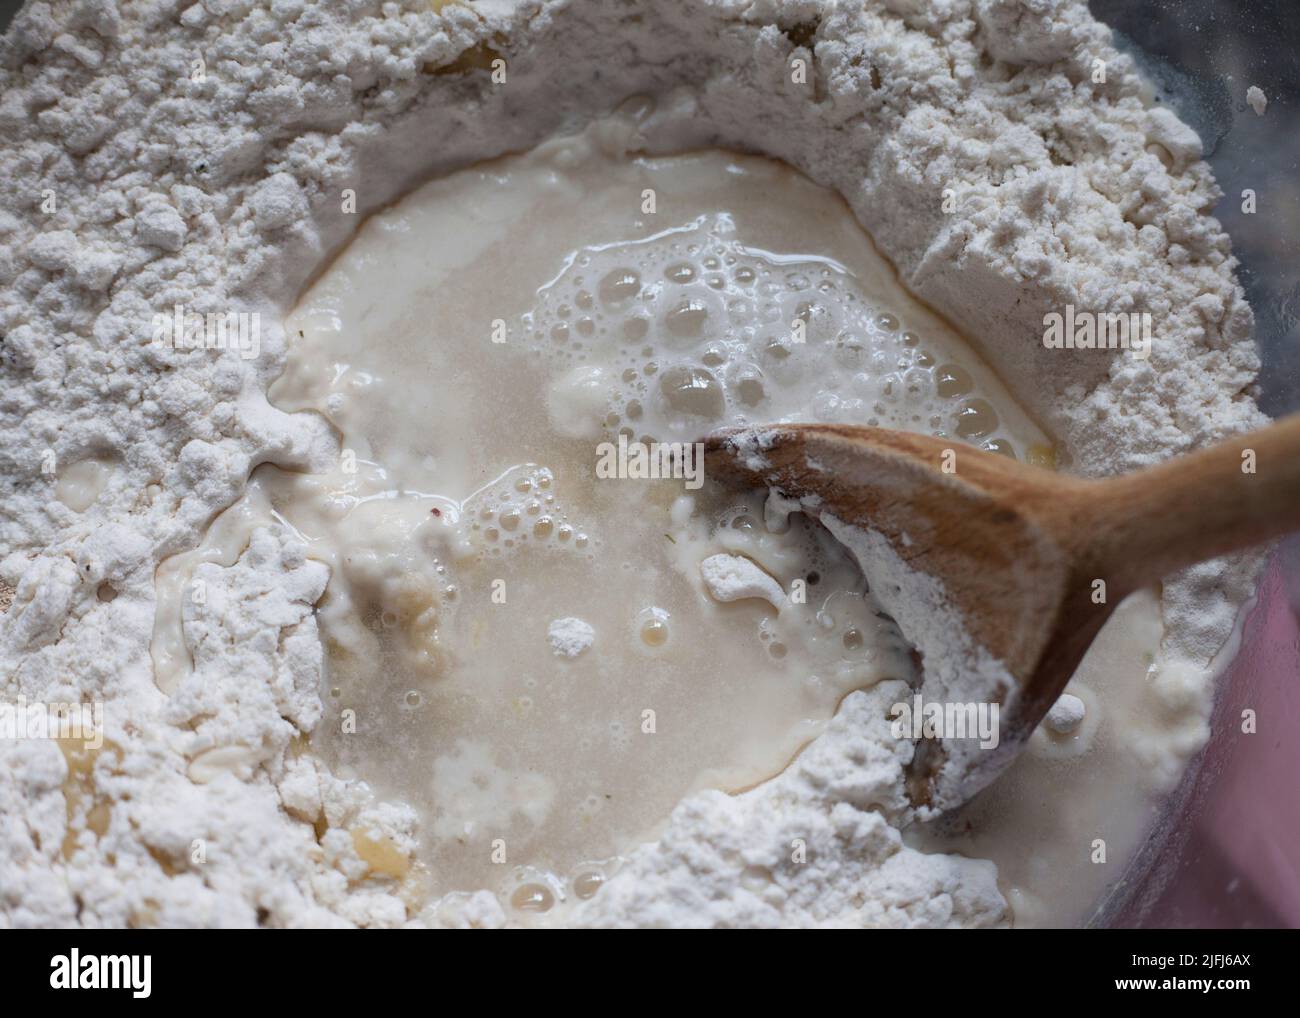 Mixing the water and oil into flour to make bread Stock Photo